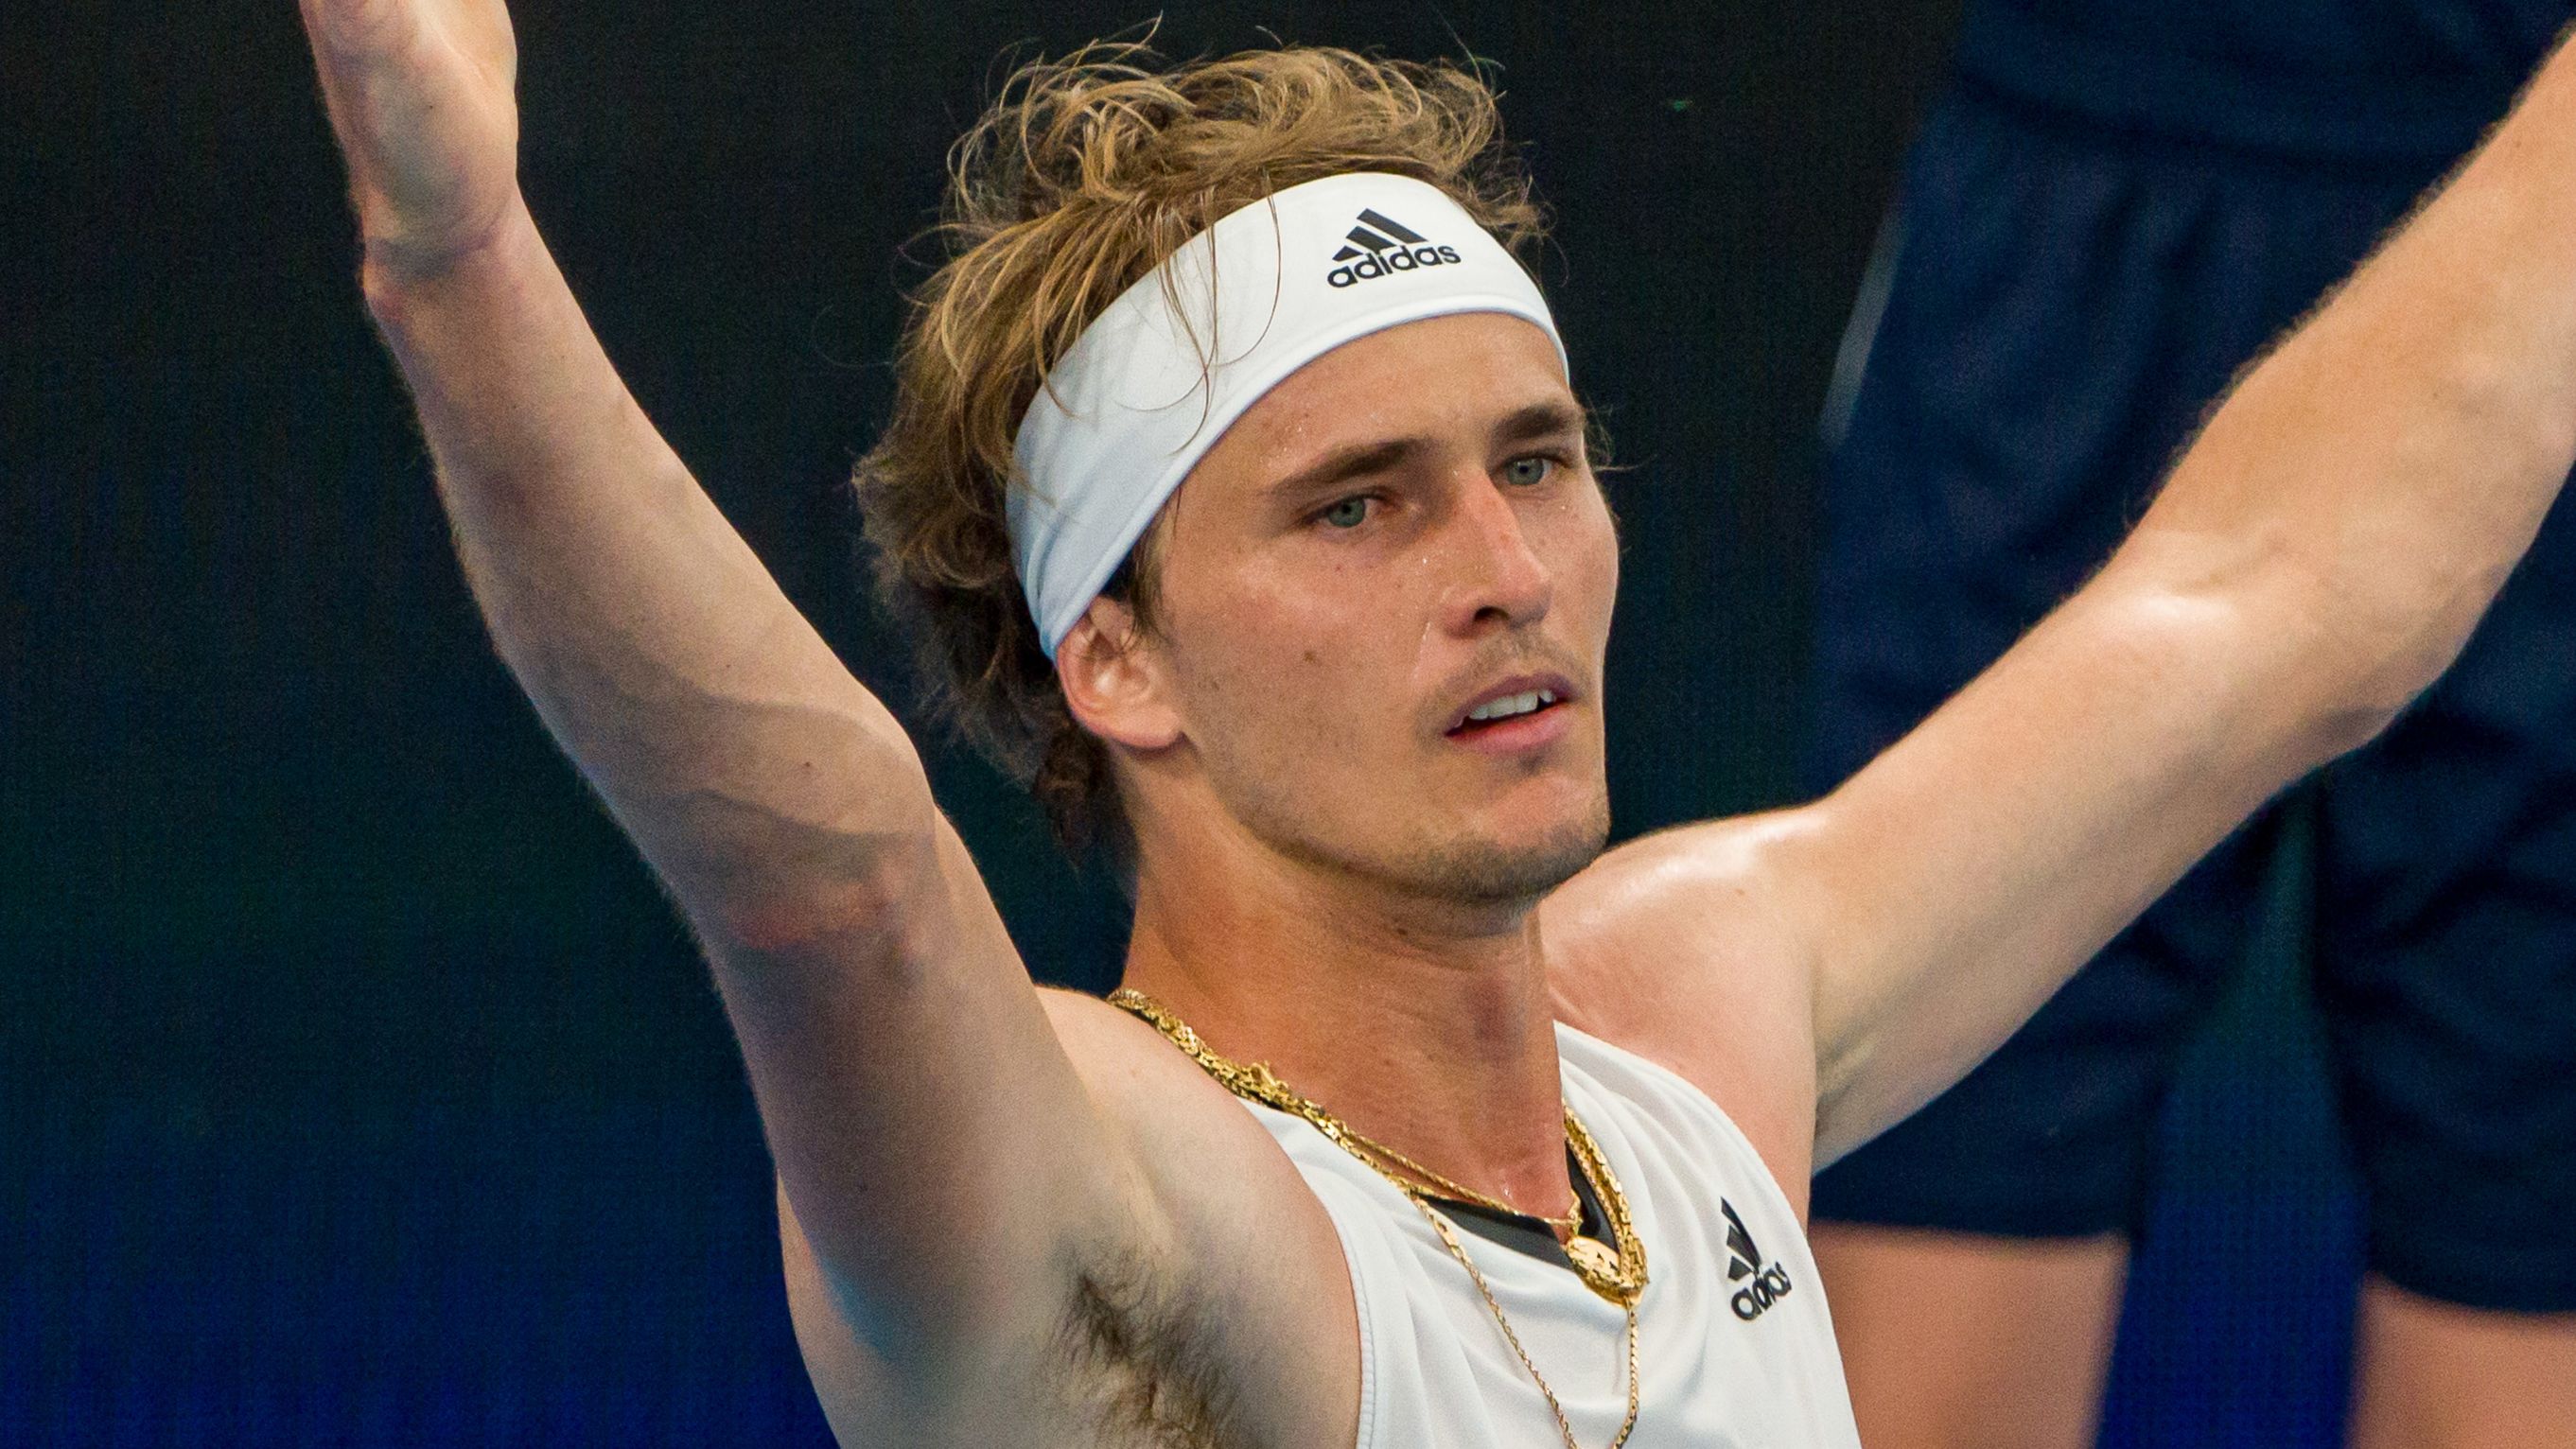 Alexander Zverev cut a frustrated figure during his loss to Jiri Lehecka at the United Cup